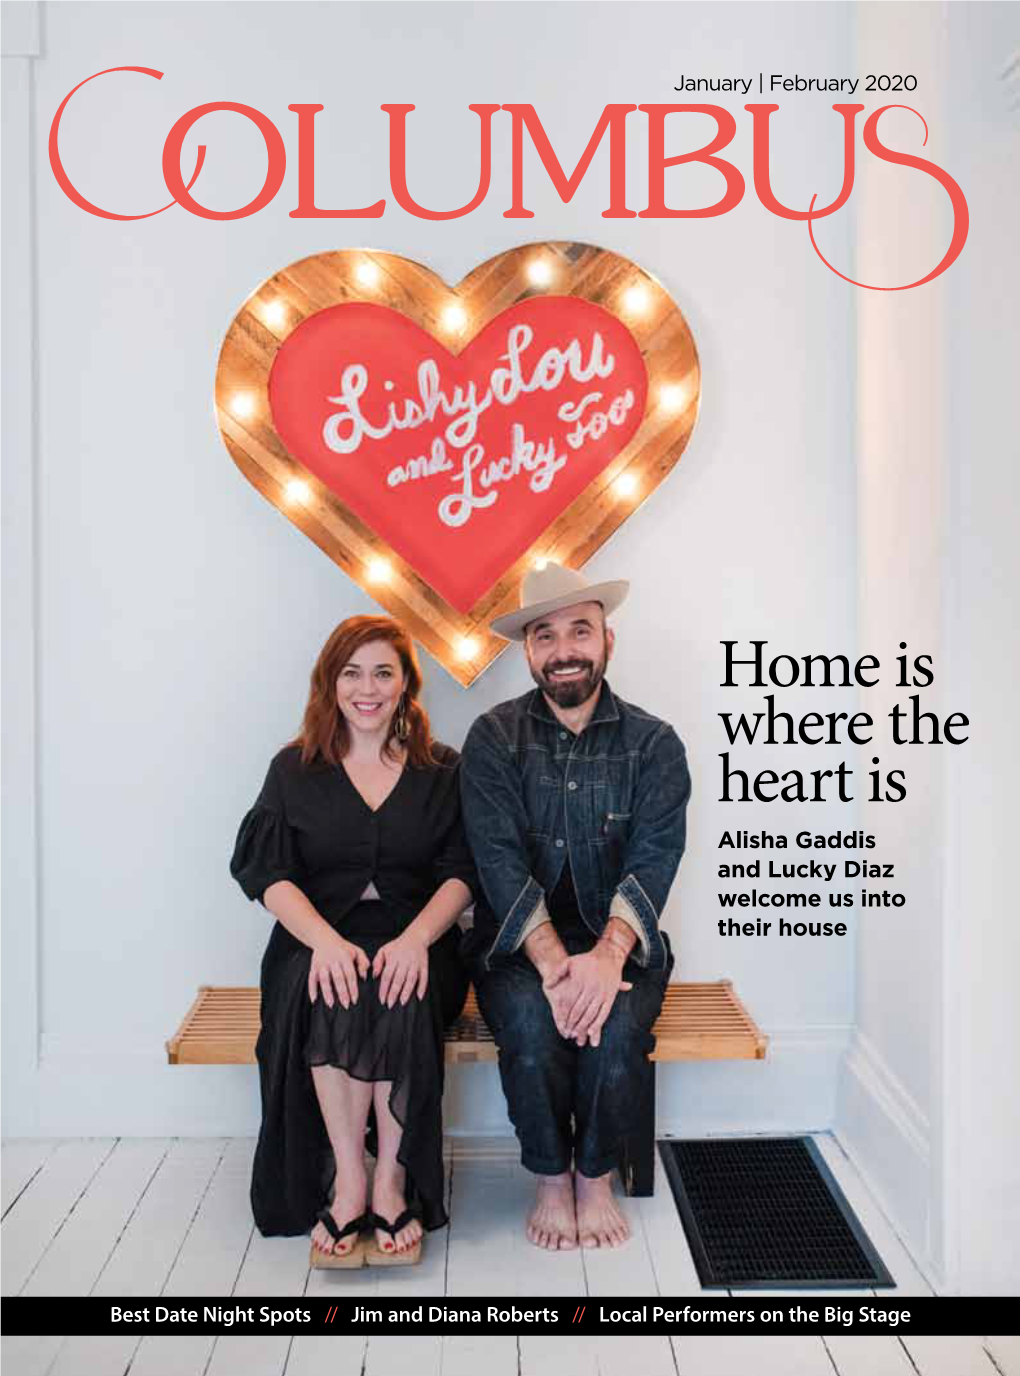 Home Is Where the Heart Is Alisha Gaddis and Lucky Diaz Welcome Us Into Their House